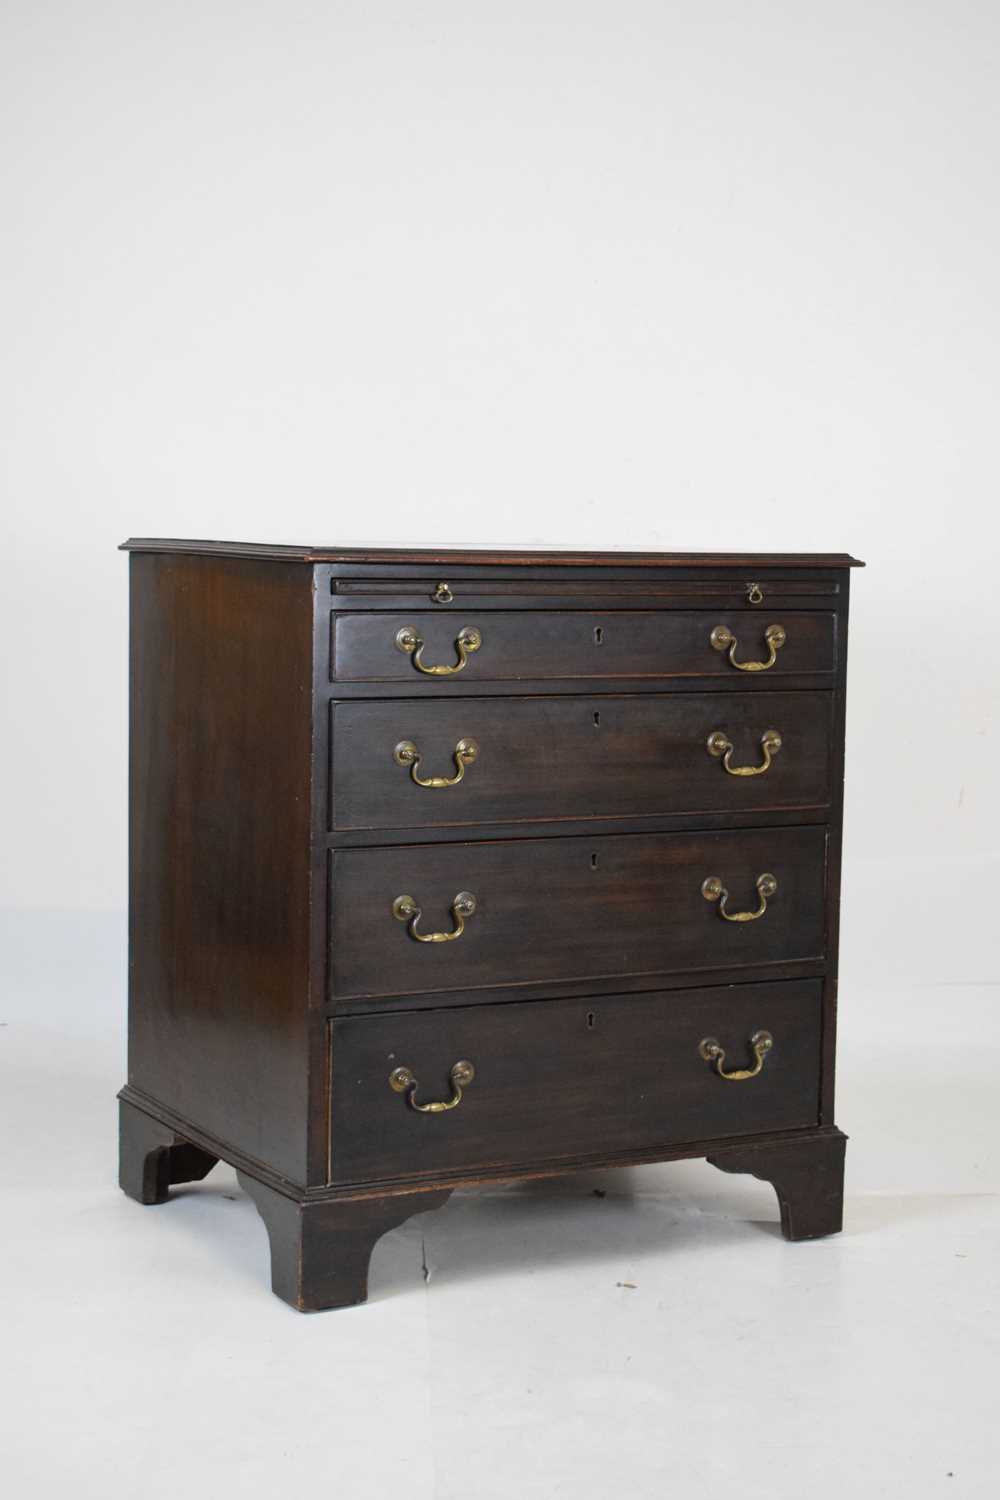 George III mahogany chest of drawers - Image 9 of 9